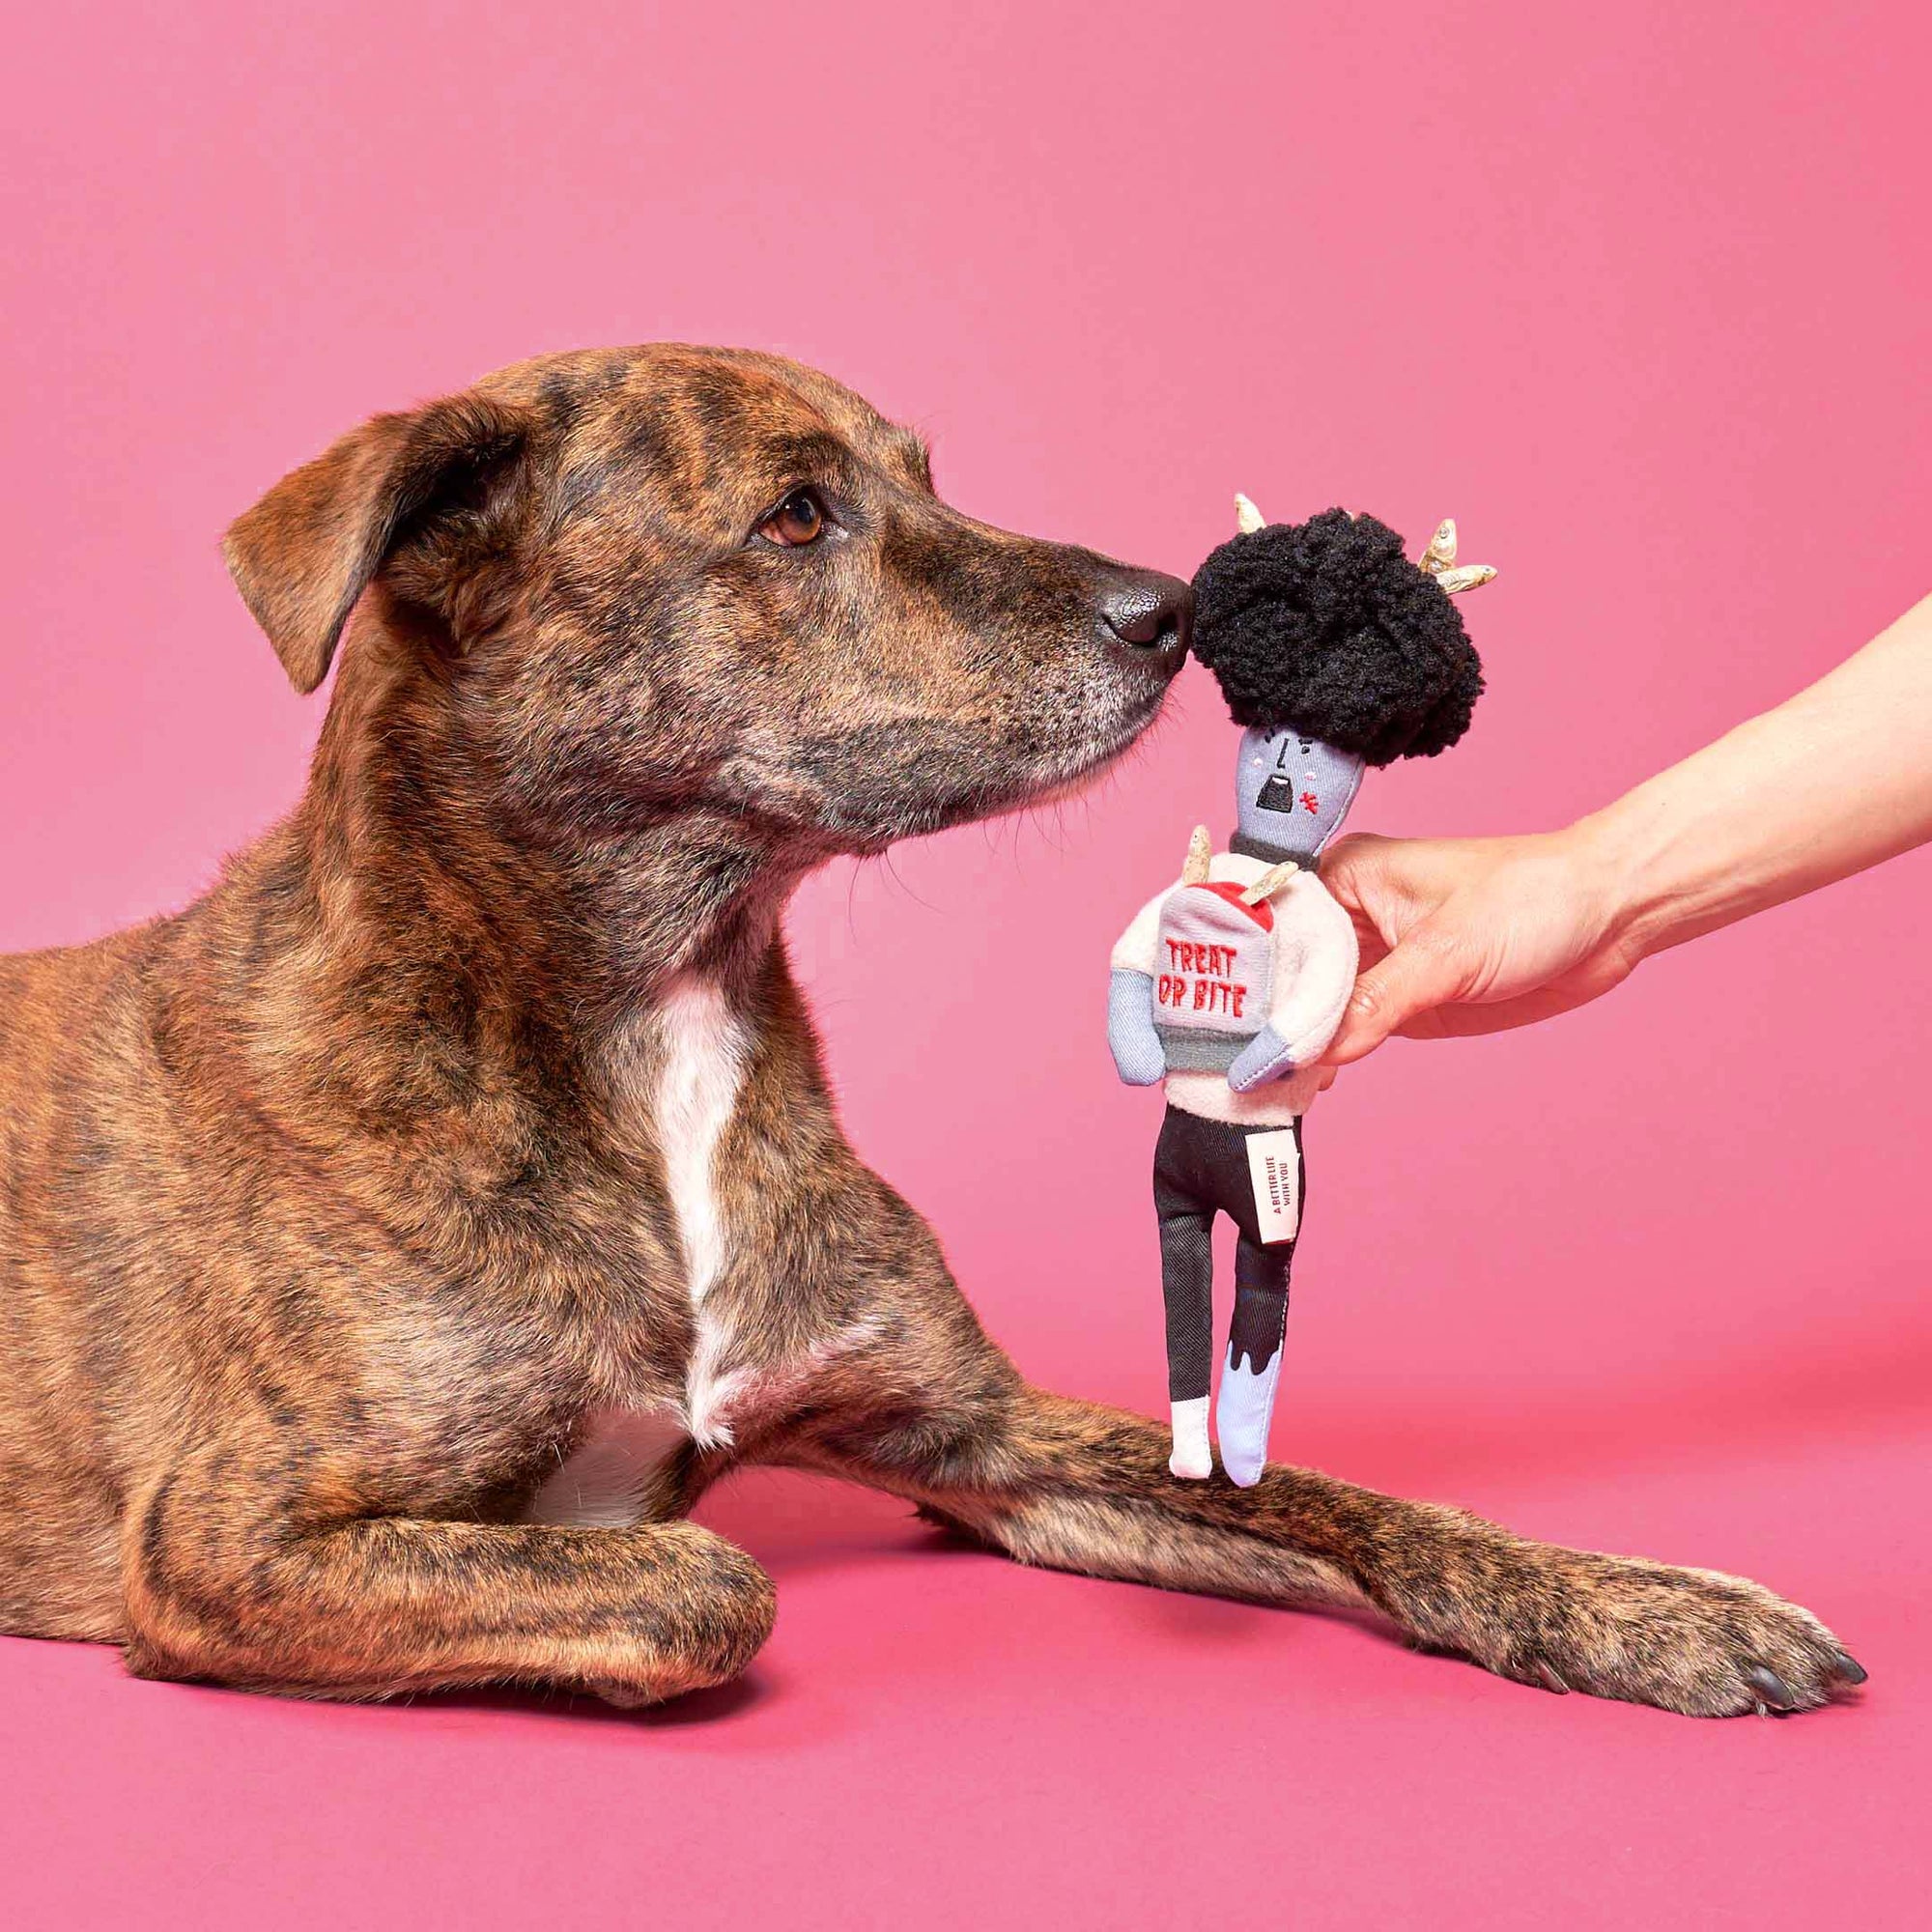 In the photograph, a brindle dog is seen attentively looking at a plush toy being offered by a human hand. The toy, designed with zombie features and antlers, bears the phrase "TREAT OR BITE" on its front. The toy's quirky design is clearly meant for interactive play, possibly hiding treats for the dog to find. The bright pink background adds a vivid contrast, emphasizing the interaction and highlighting the colors of the dog and the toy.